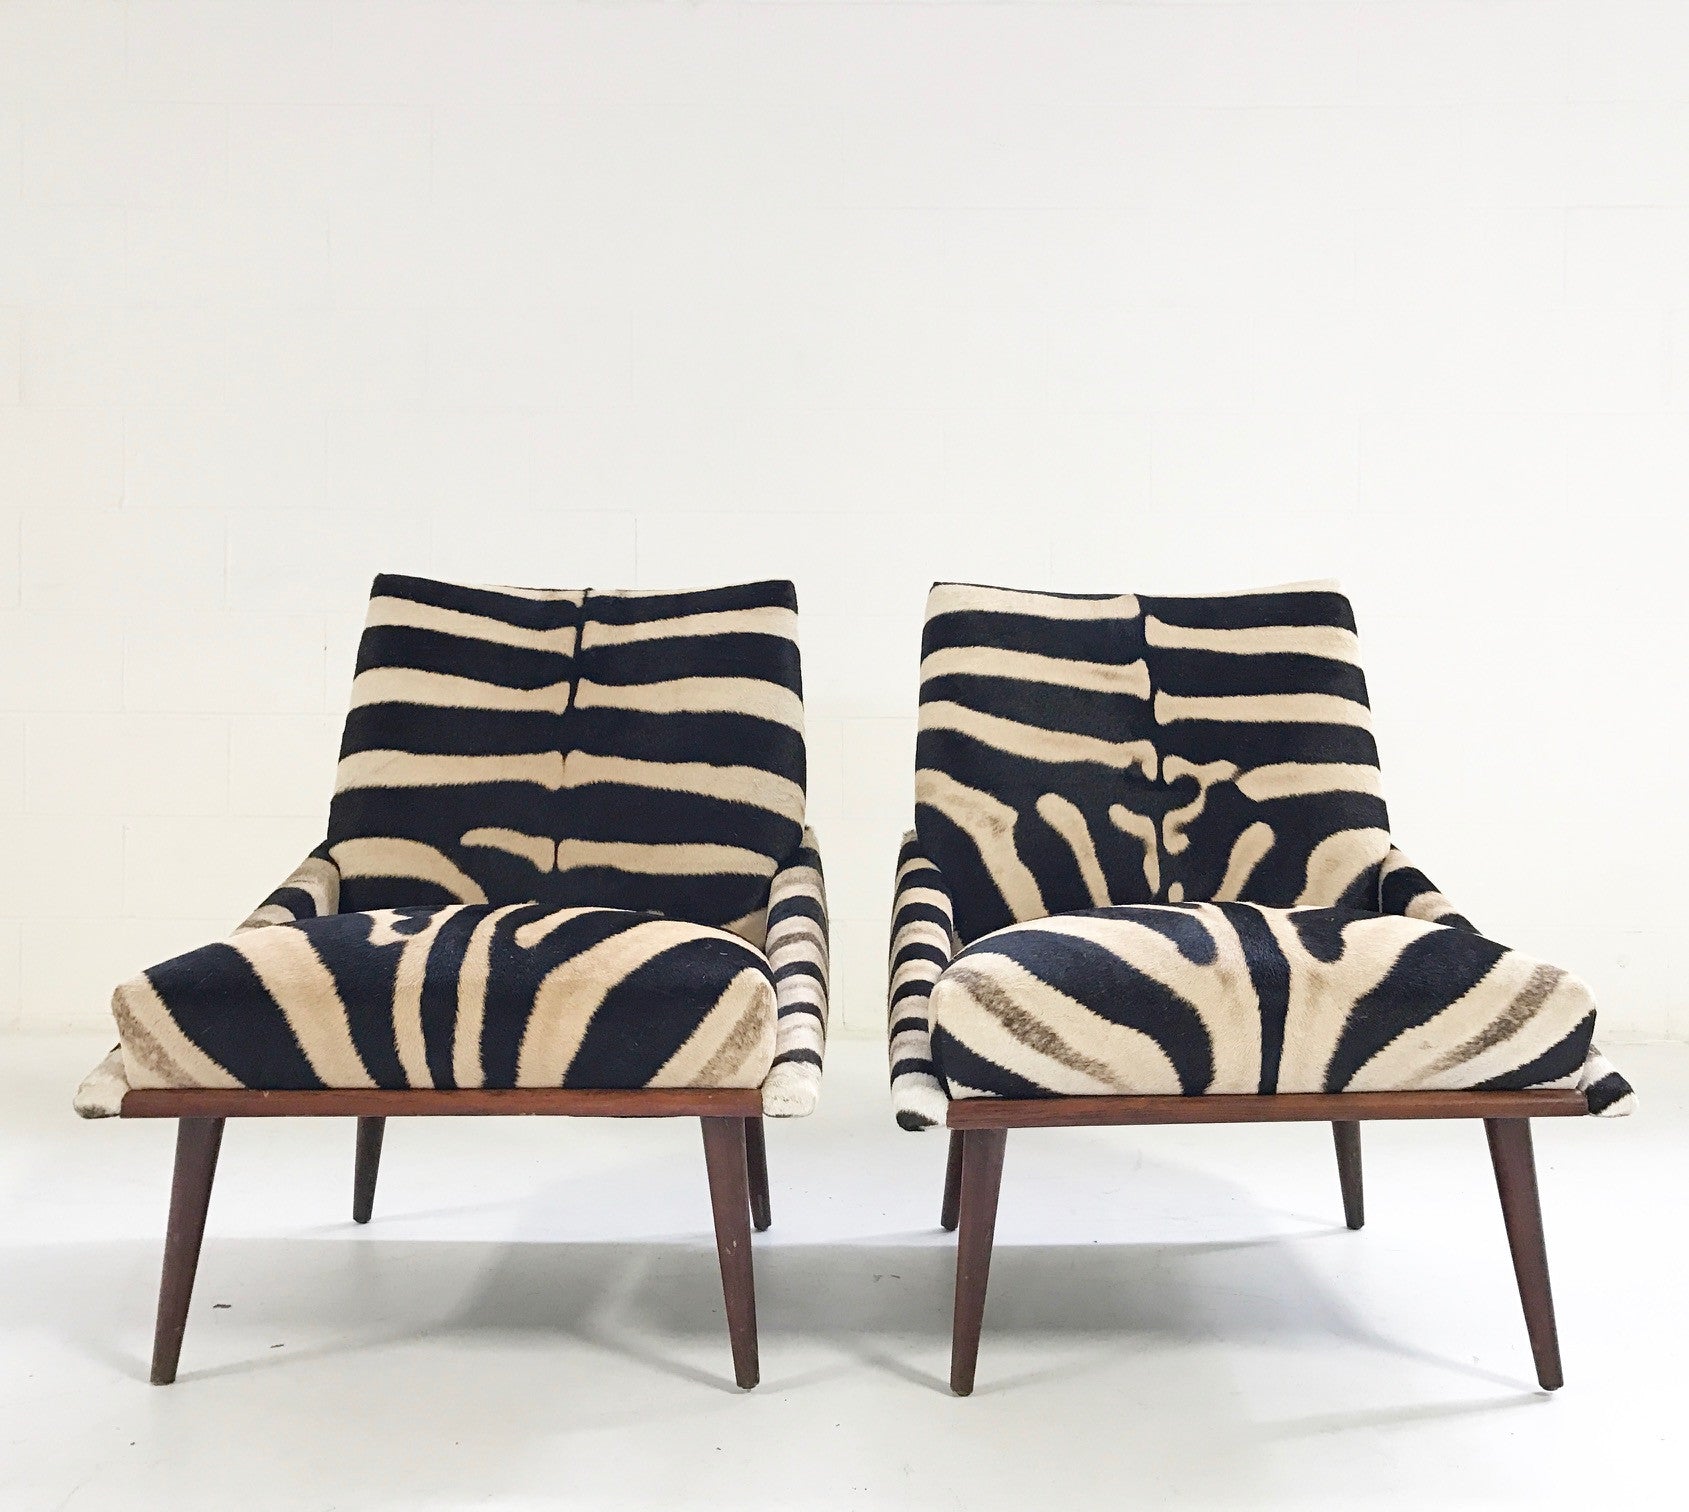 Lounge Chairs in Zebra Hide, pair - FORSYTH